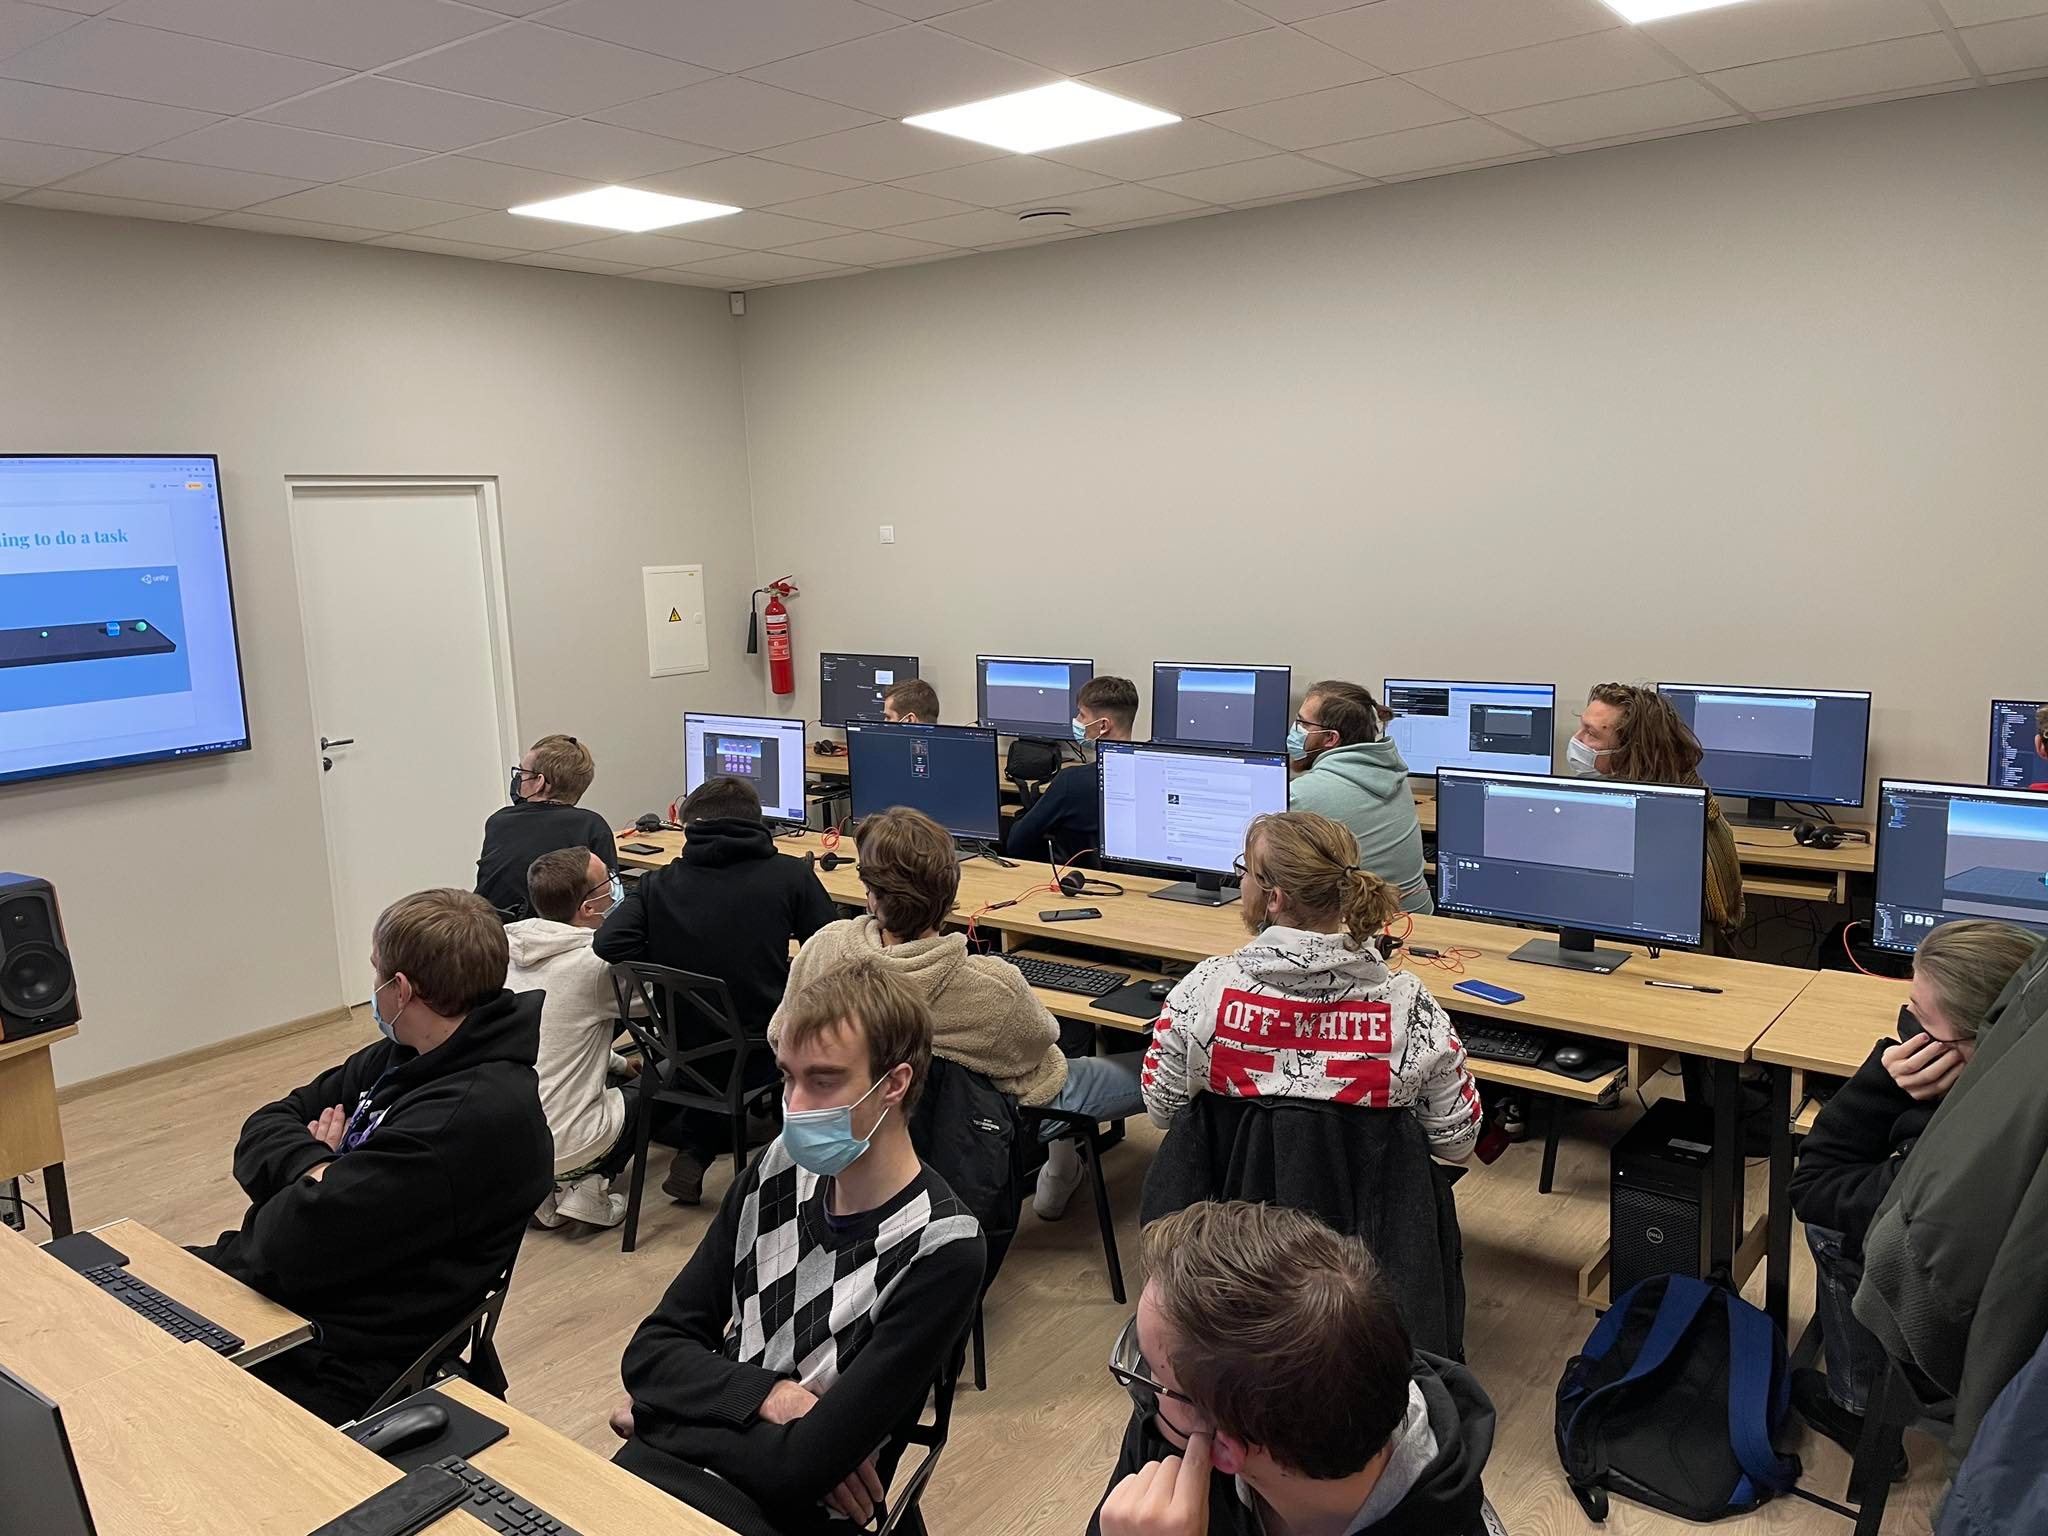 Introductory lessons at Kaunas Information Technology School